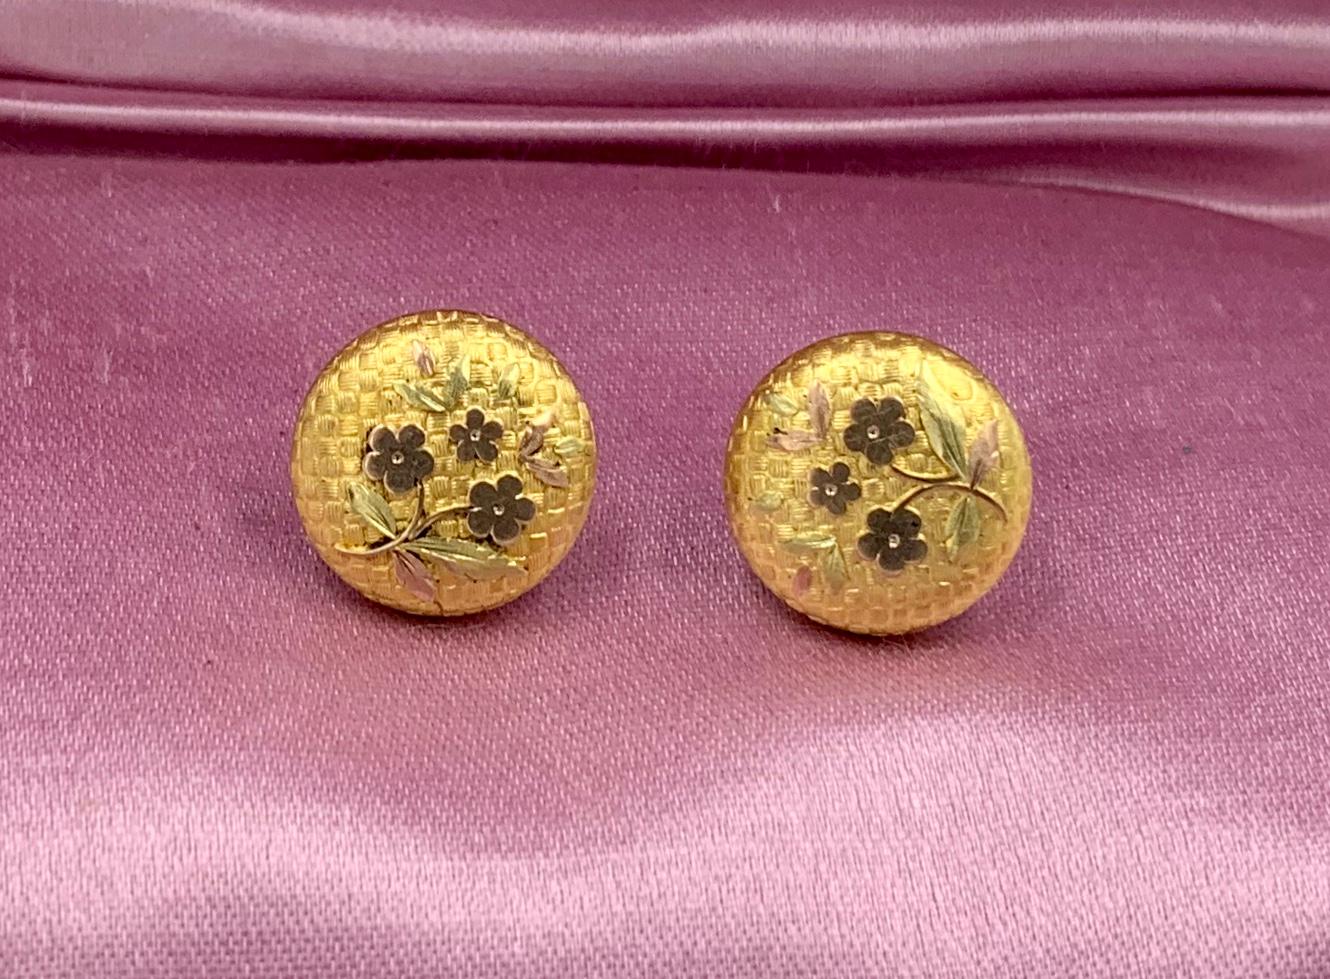 This is a rare pair of Etruscan Revival Victorian Flower Motif Earrings in 10 Karat Gold.  The exquisite earrings have an engraved checkerboard background with a flower and leaf motif.   The gold work is stunning and the warm color of the antique